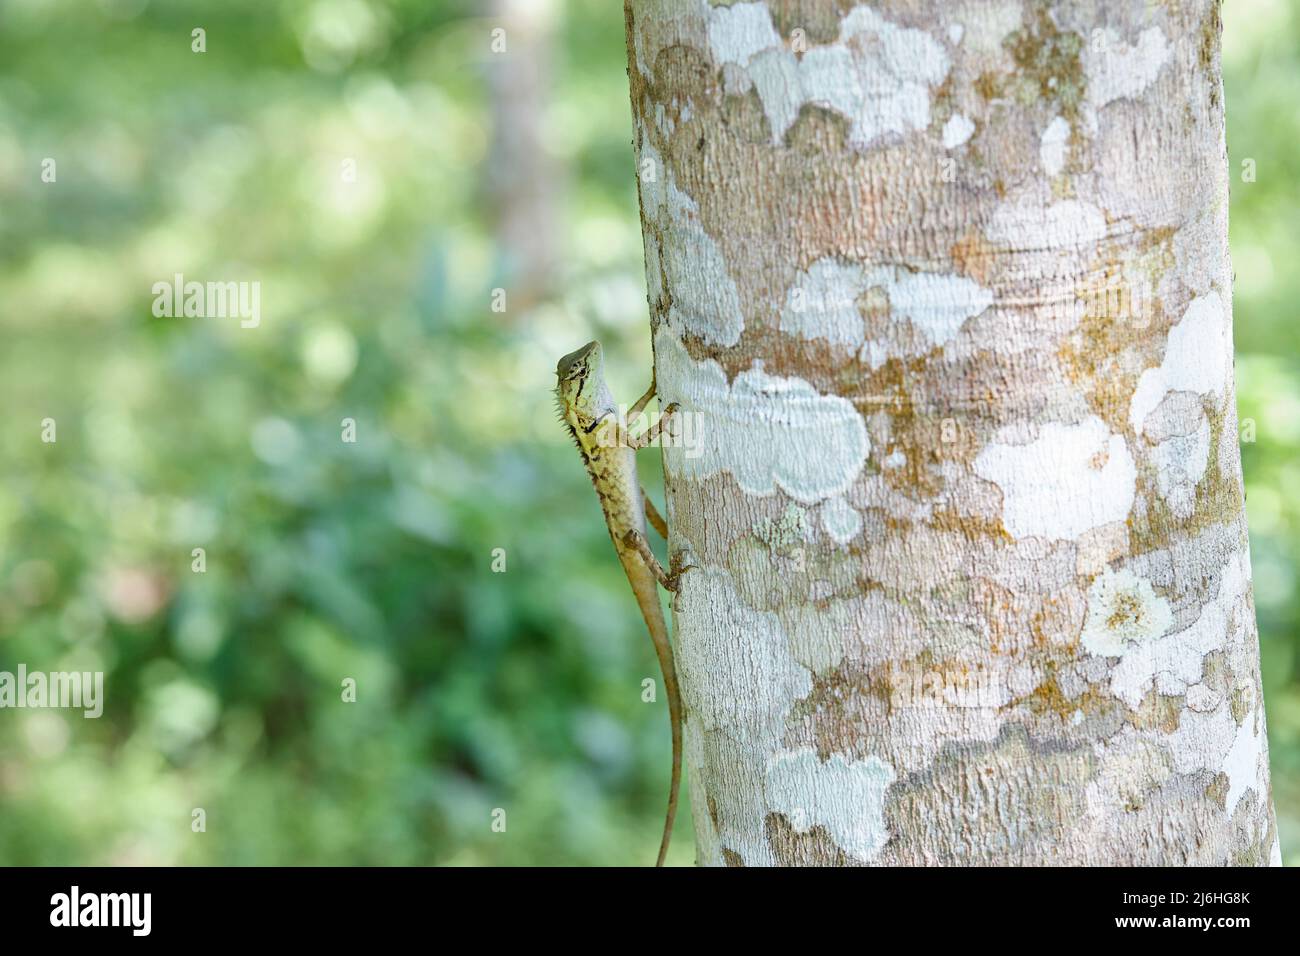 Lizard on tree in forest Stock Photo